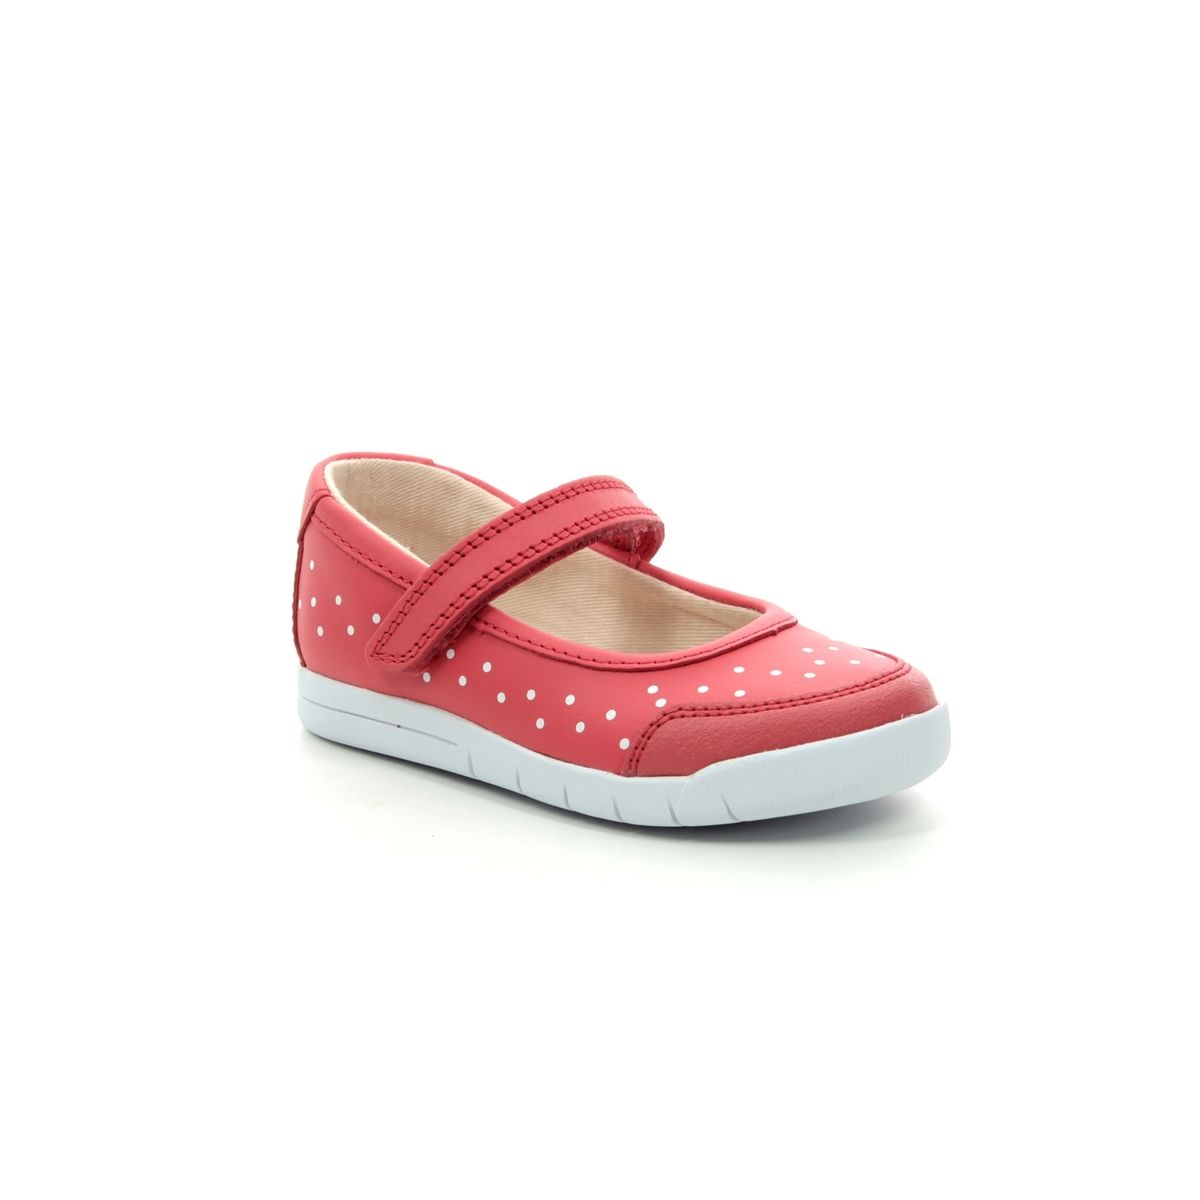 Clarks Emery Halo T F Fit Coral first shoes